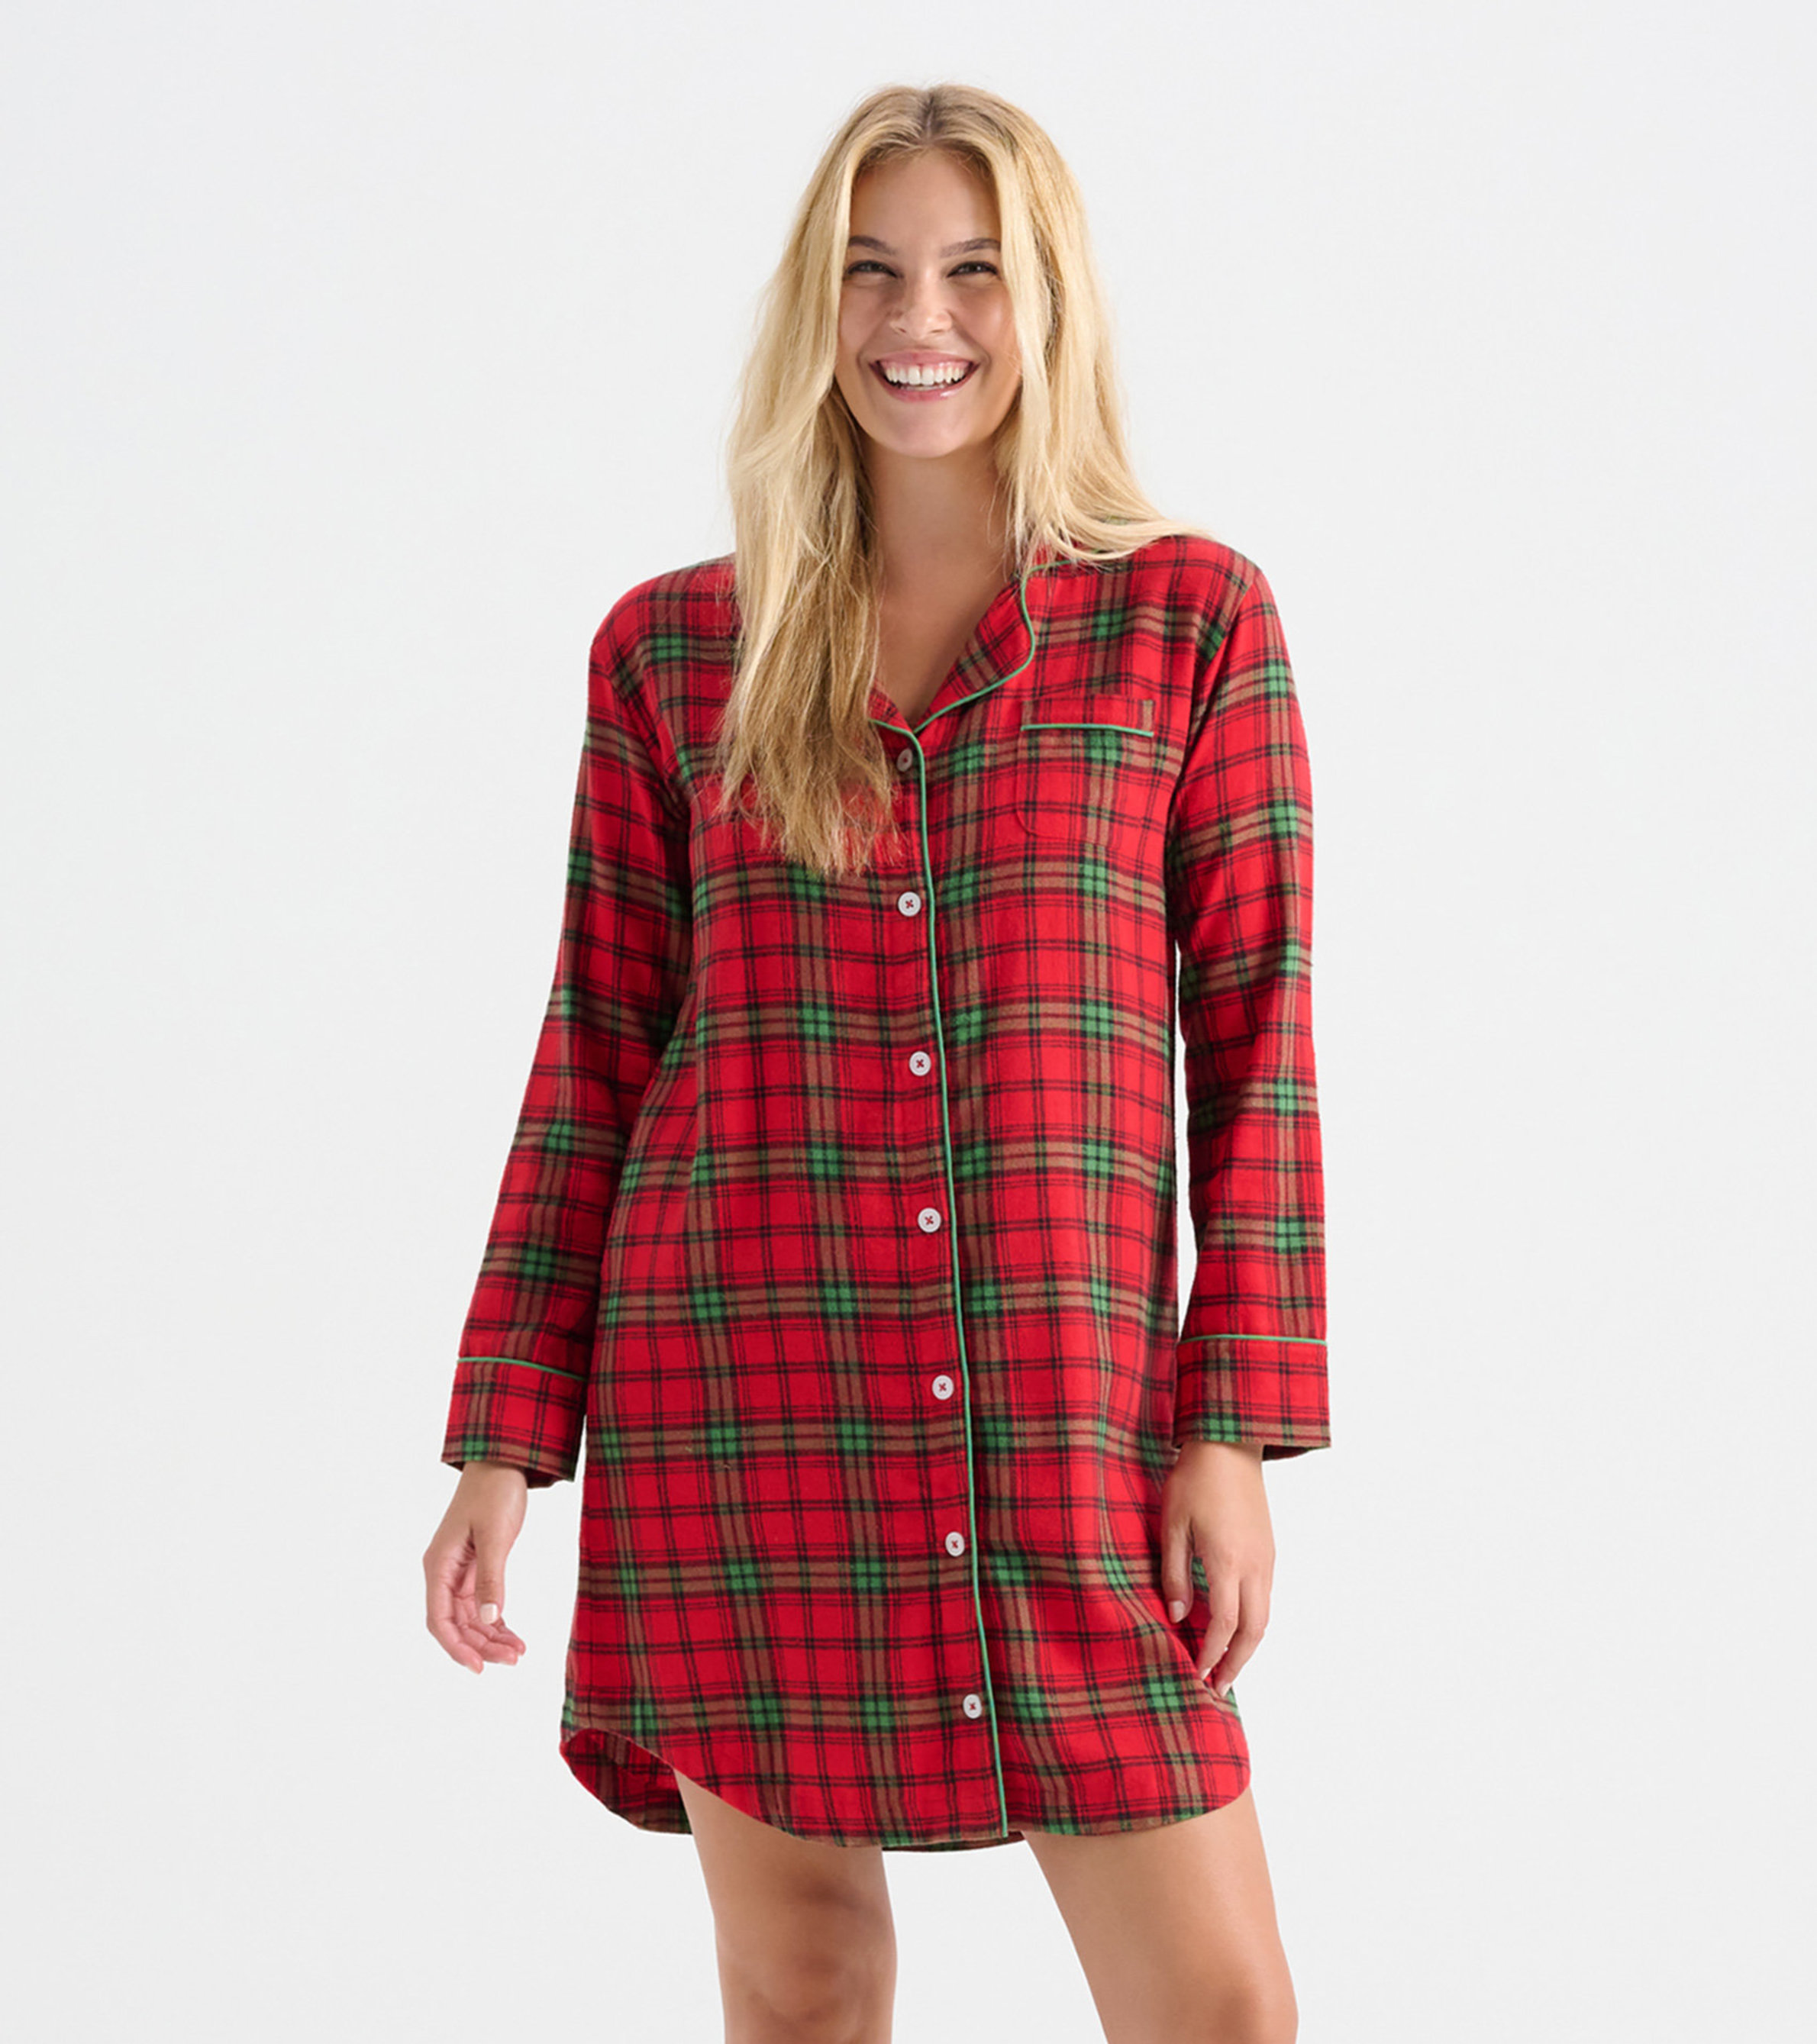 https://cdn.littlebluehouse.com/product_images/womens-classic-holiday-plaid-flannel-nightgown/NDAPLAD409_jpg/pdp_zoom.jpg?c=1696365154&locale=us_en